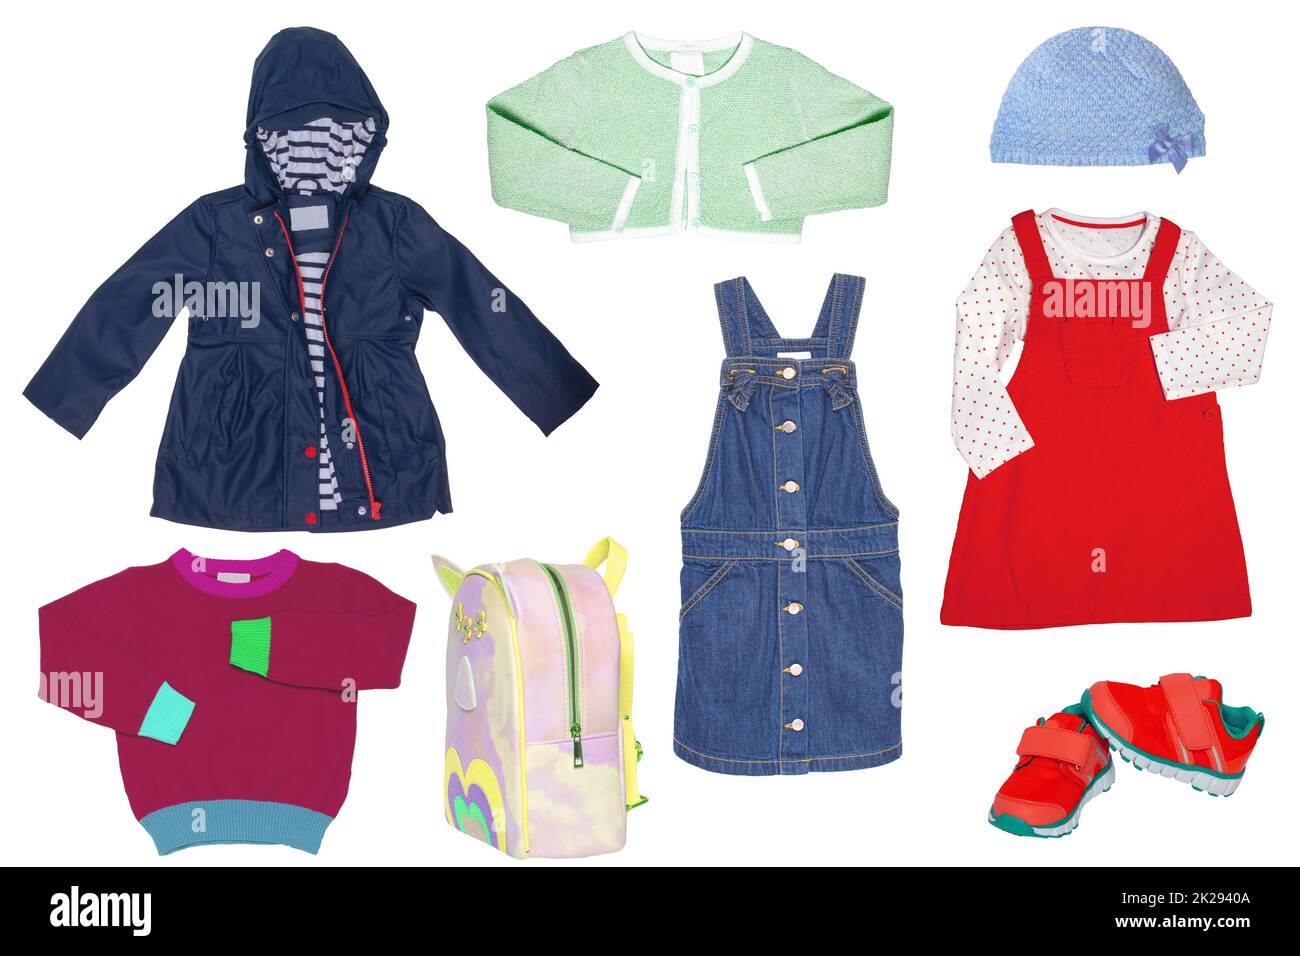 Collage set of little girl spring clothing isolated on a white background. The collection of a stylish blue down jacket, a sweater, a jeans skirt, sneaker,a bag and a dress with hood. Kids autumn and winter fashion. Stock Photo